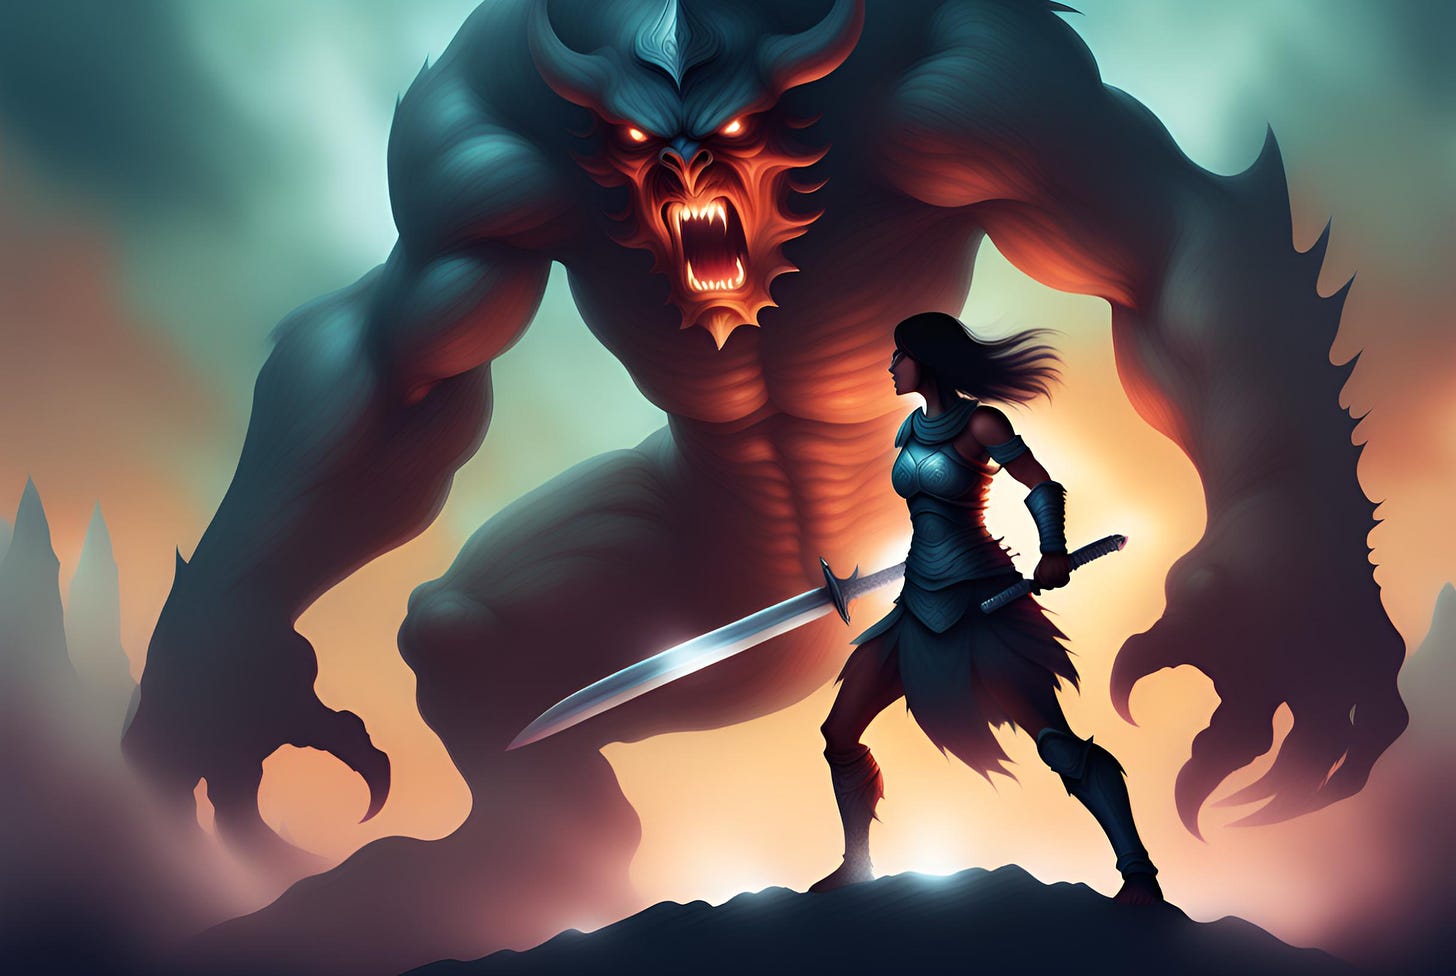 Illustration of a woman warrior with a sword facing an angry monster